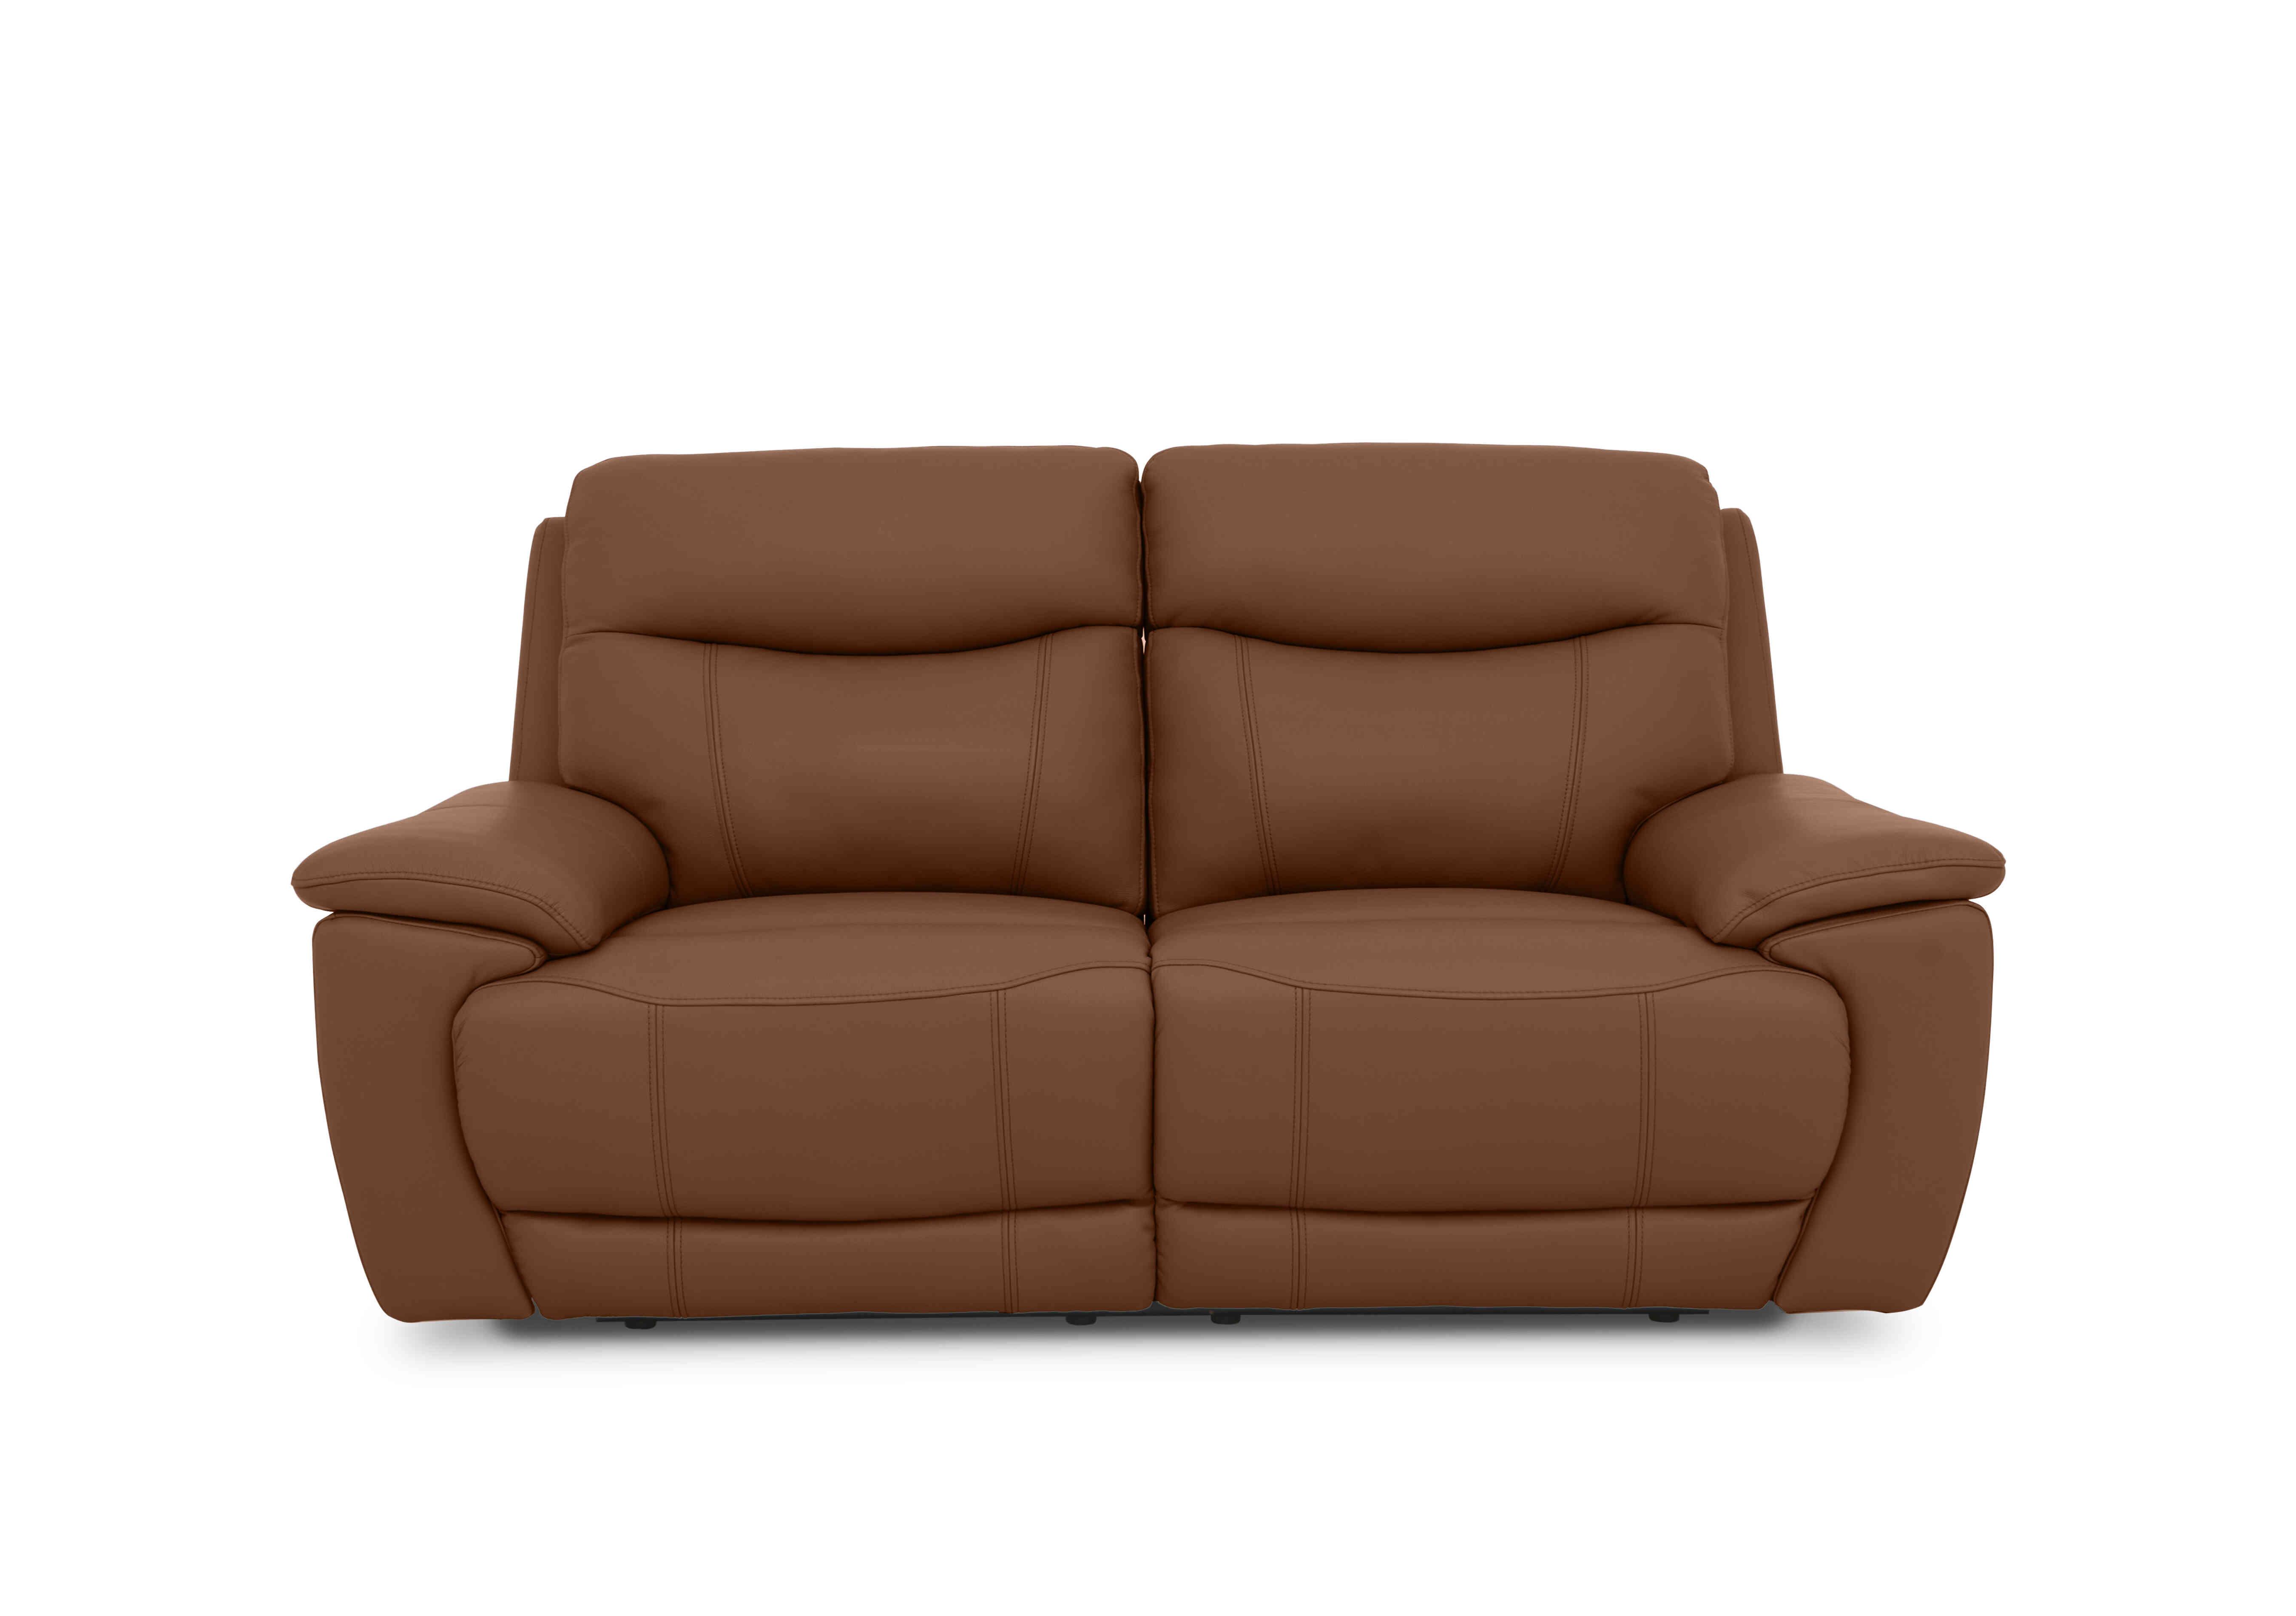 Sloane 3 Seater Leather Sofa in Cat-60/07 Butterscotch on Furniture Village